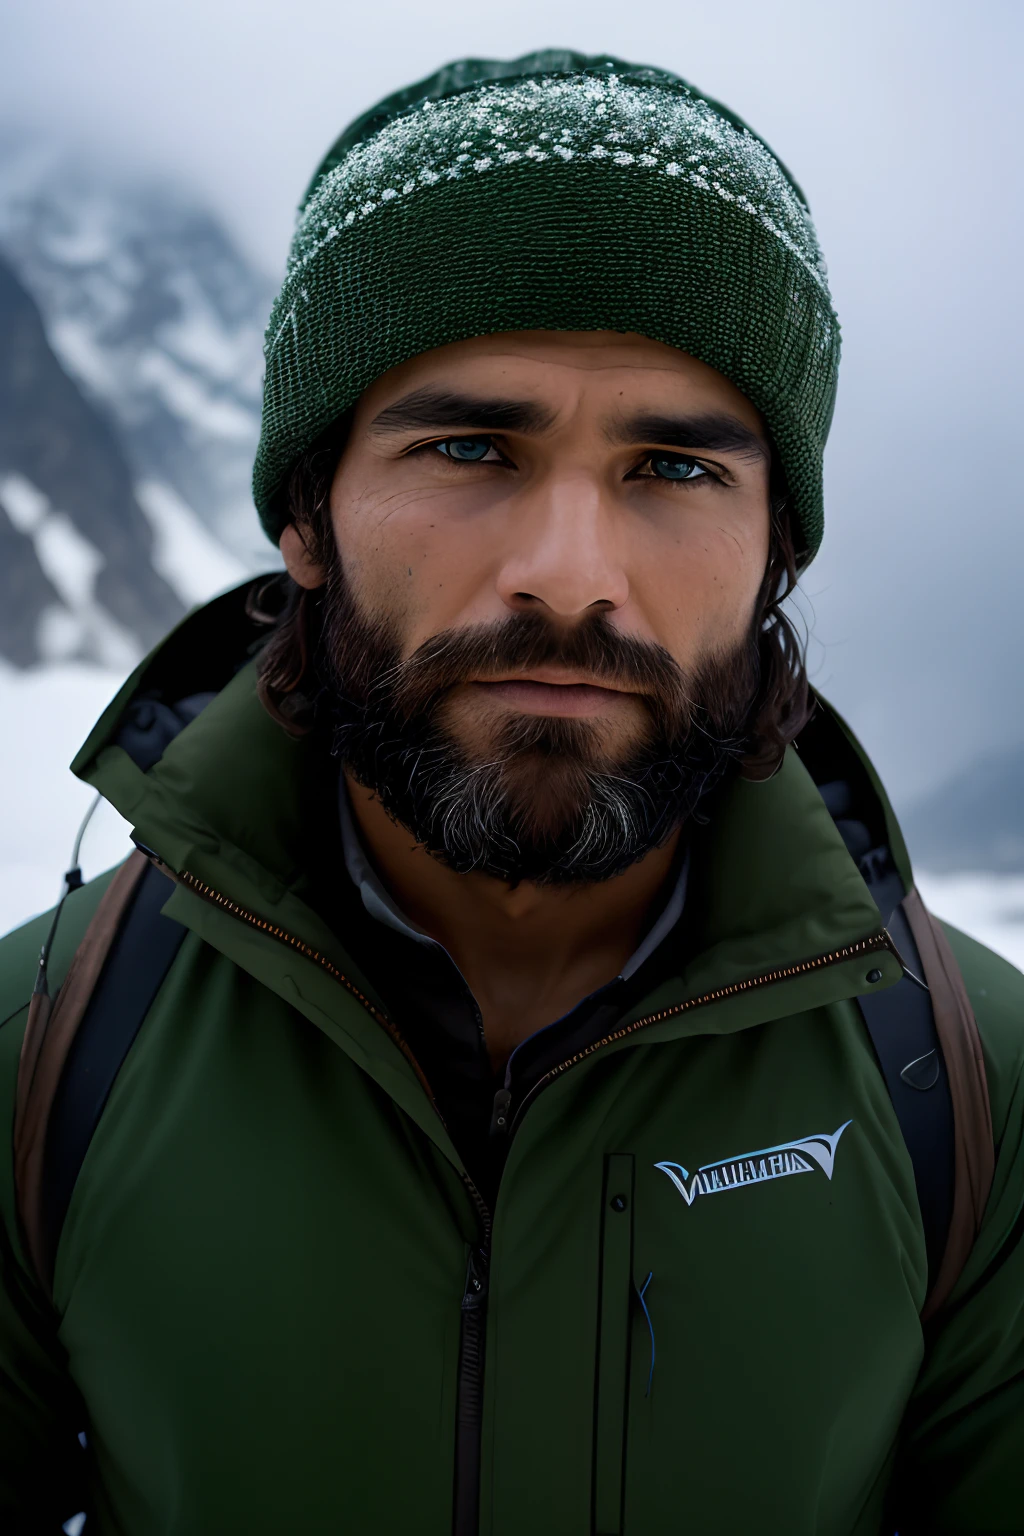 (best quality, high-res, realistic:1.37), detailed portrait photo, close up shot of a mountaineer in the Himalayas. The mountaineer has a weather-beaten face and is dressed in winter gear. 

The heavy snowfall in the background creates a serene and ethereal atmosphere. The snowflakes delicately cover the mountaineer's hat and shoulders, adding texture to the image. The mountaineer's face shows determination and resilience, with icicles hanging from their beard and eyelashes. 

Despite the challenging weather conditions, there are rays of sunlight piercing through the thick clouds, casting a warm glow on the mountaineer's face. The interplay of light and shadow accentuates the ruggedness of the mountaineer's features. 

The color palette of the image consists of shades of green and black, representing the lush vegetation in the lower altitudes of the Himalayas and the rocky terrains higher up. 

The overall lighting is dramatic, with the mountaineer standing in the foreground and the snow-covered peaks fading into the background. The lighting creates a sense of depth and emphasizes the majestic beauty of the Himalayan mountains. 

This prompt captures the raw and awe-inspiring nature of mountaineering in the Himalayas, showcasing the determination and courage of the mountaineer in the face of challenging weather conditions and extreme landscapes.